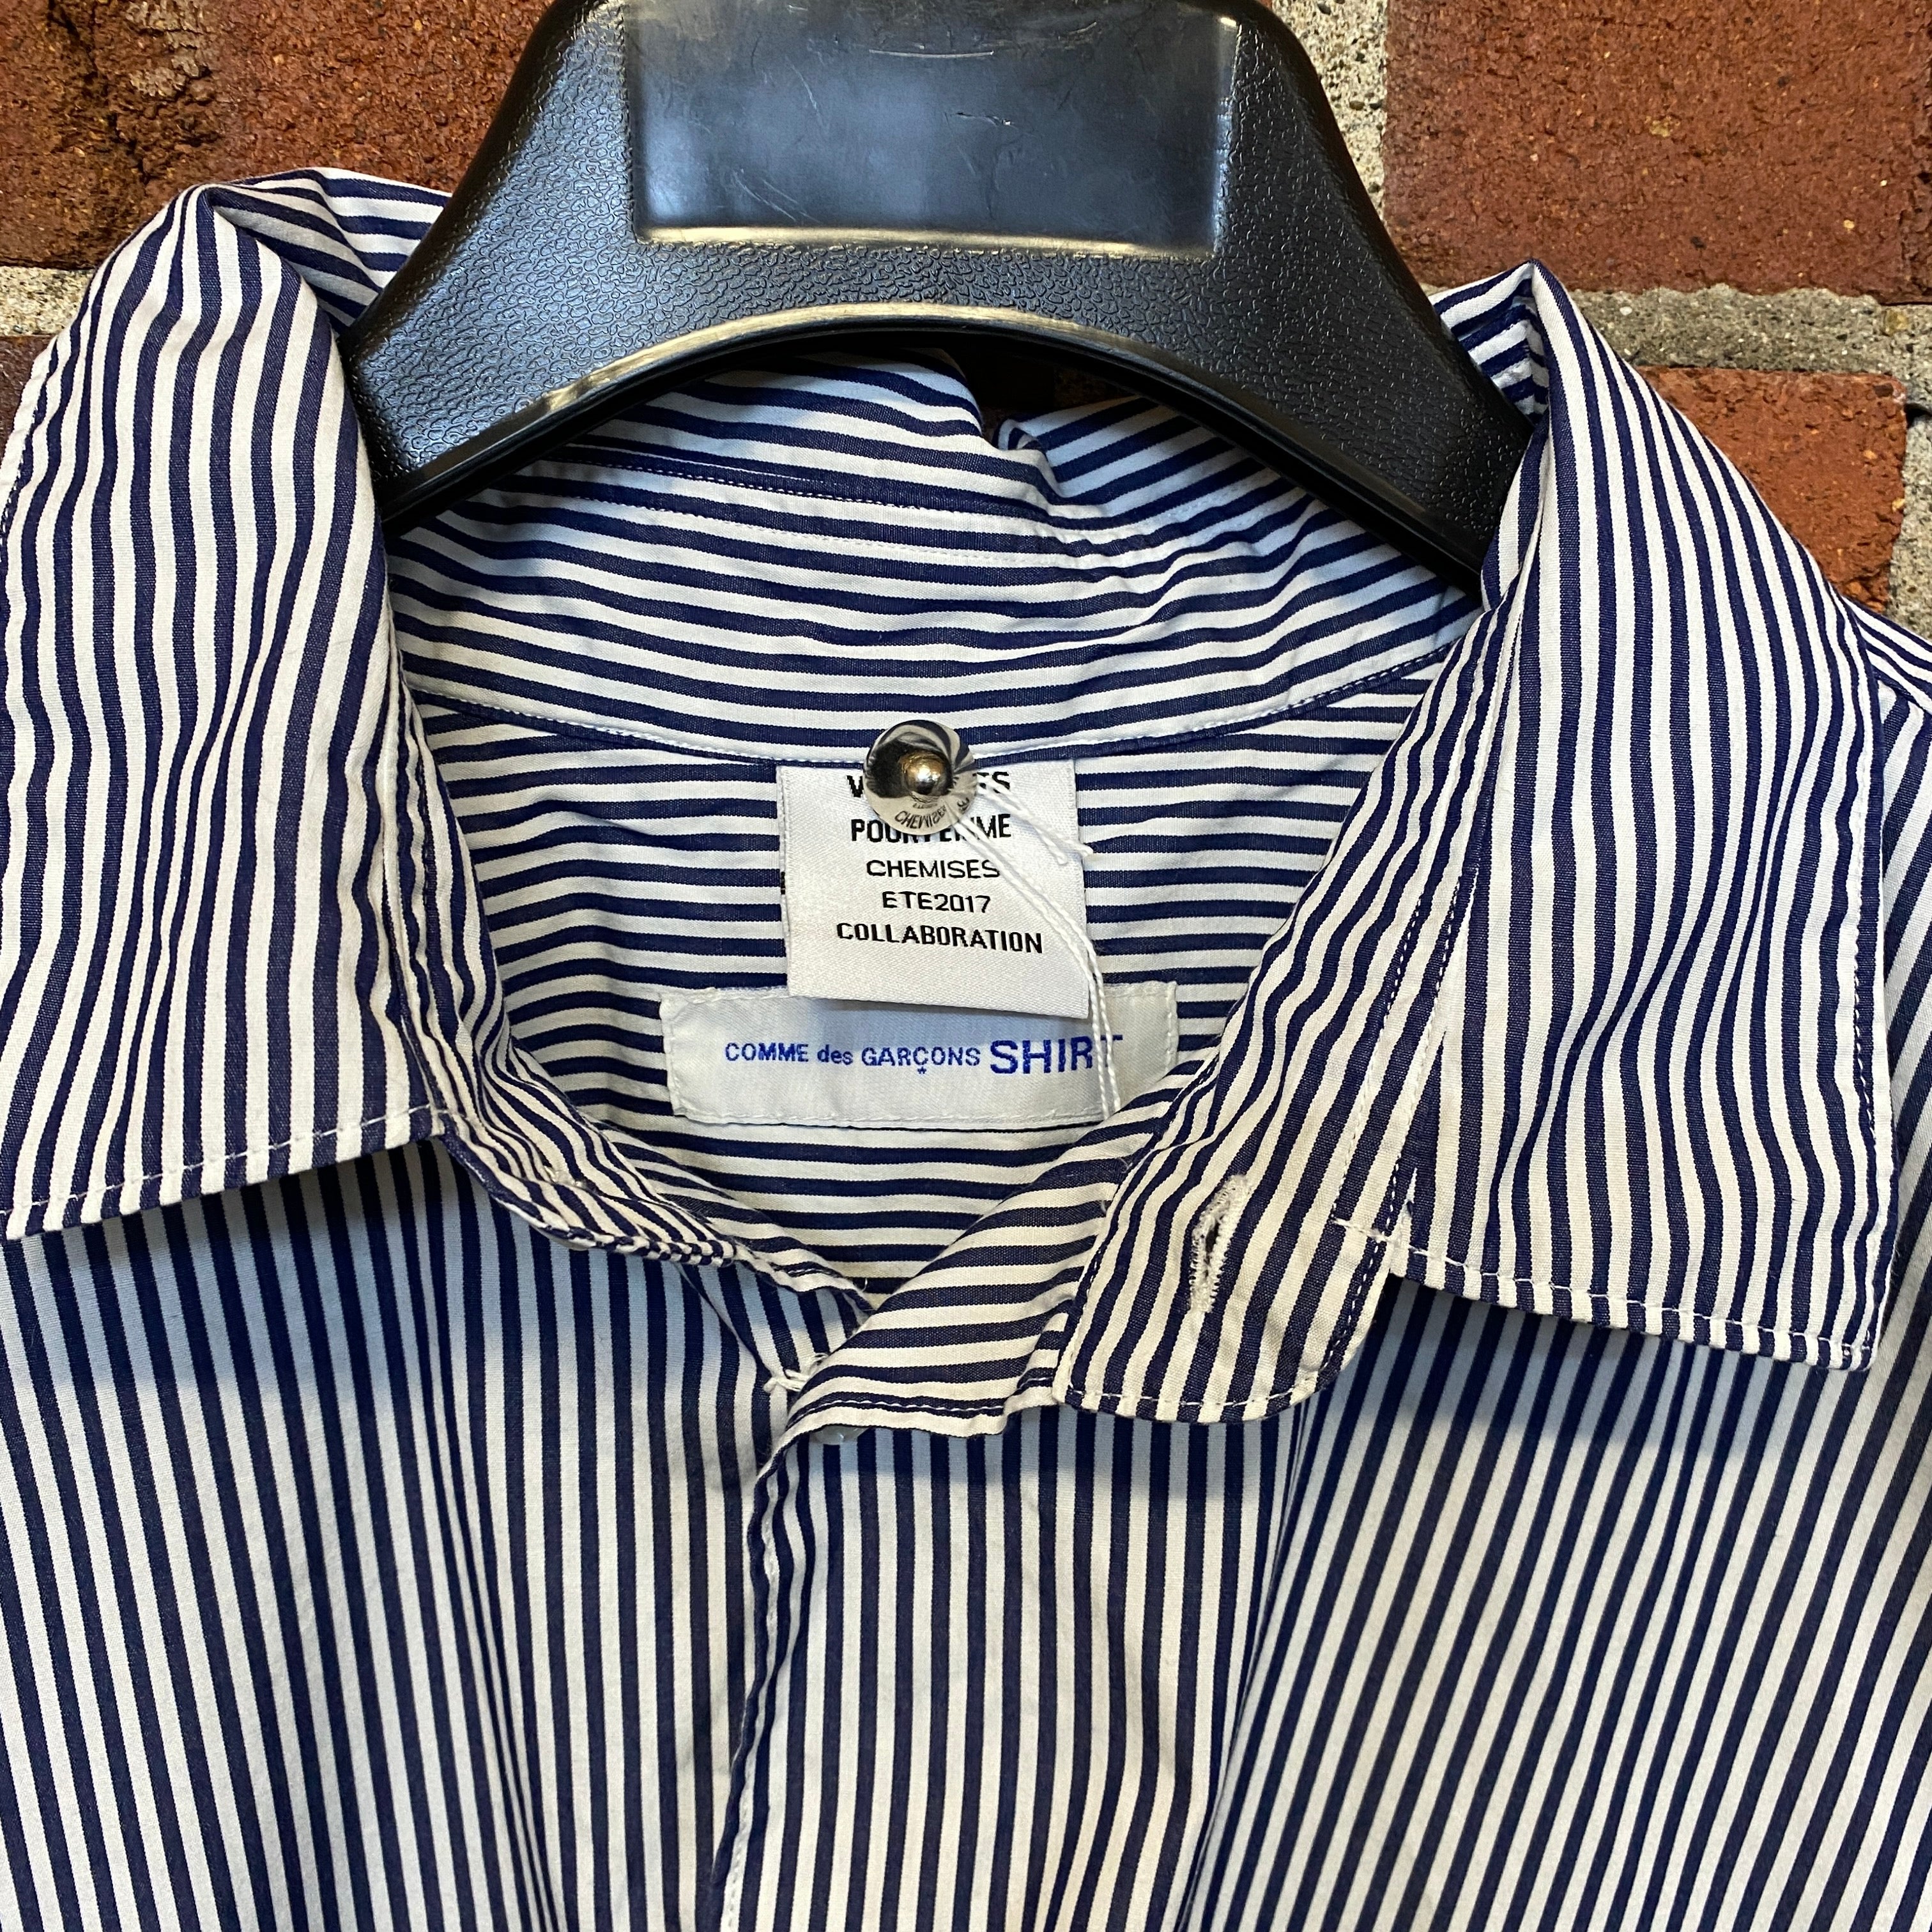 X COMME shirt – Hunters and Collectors